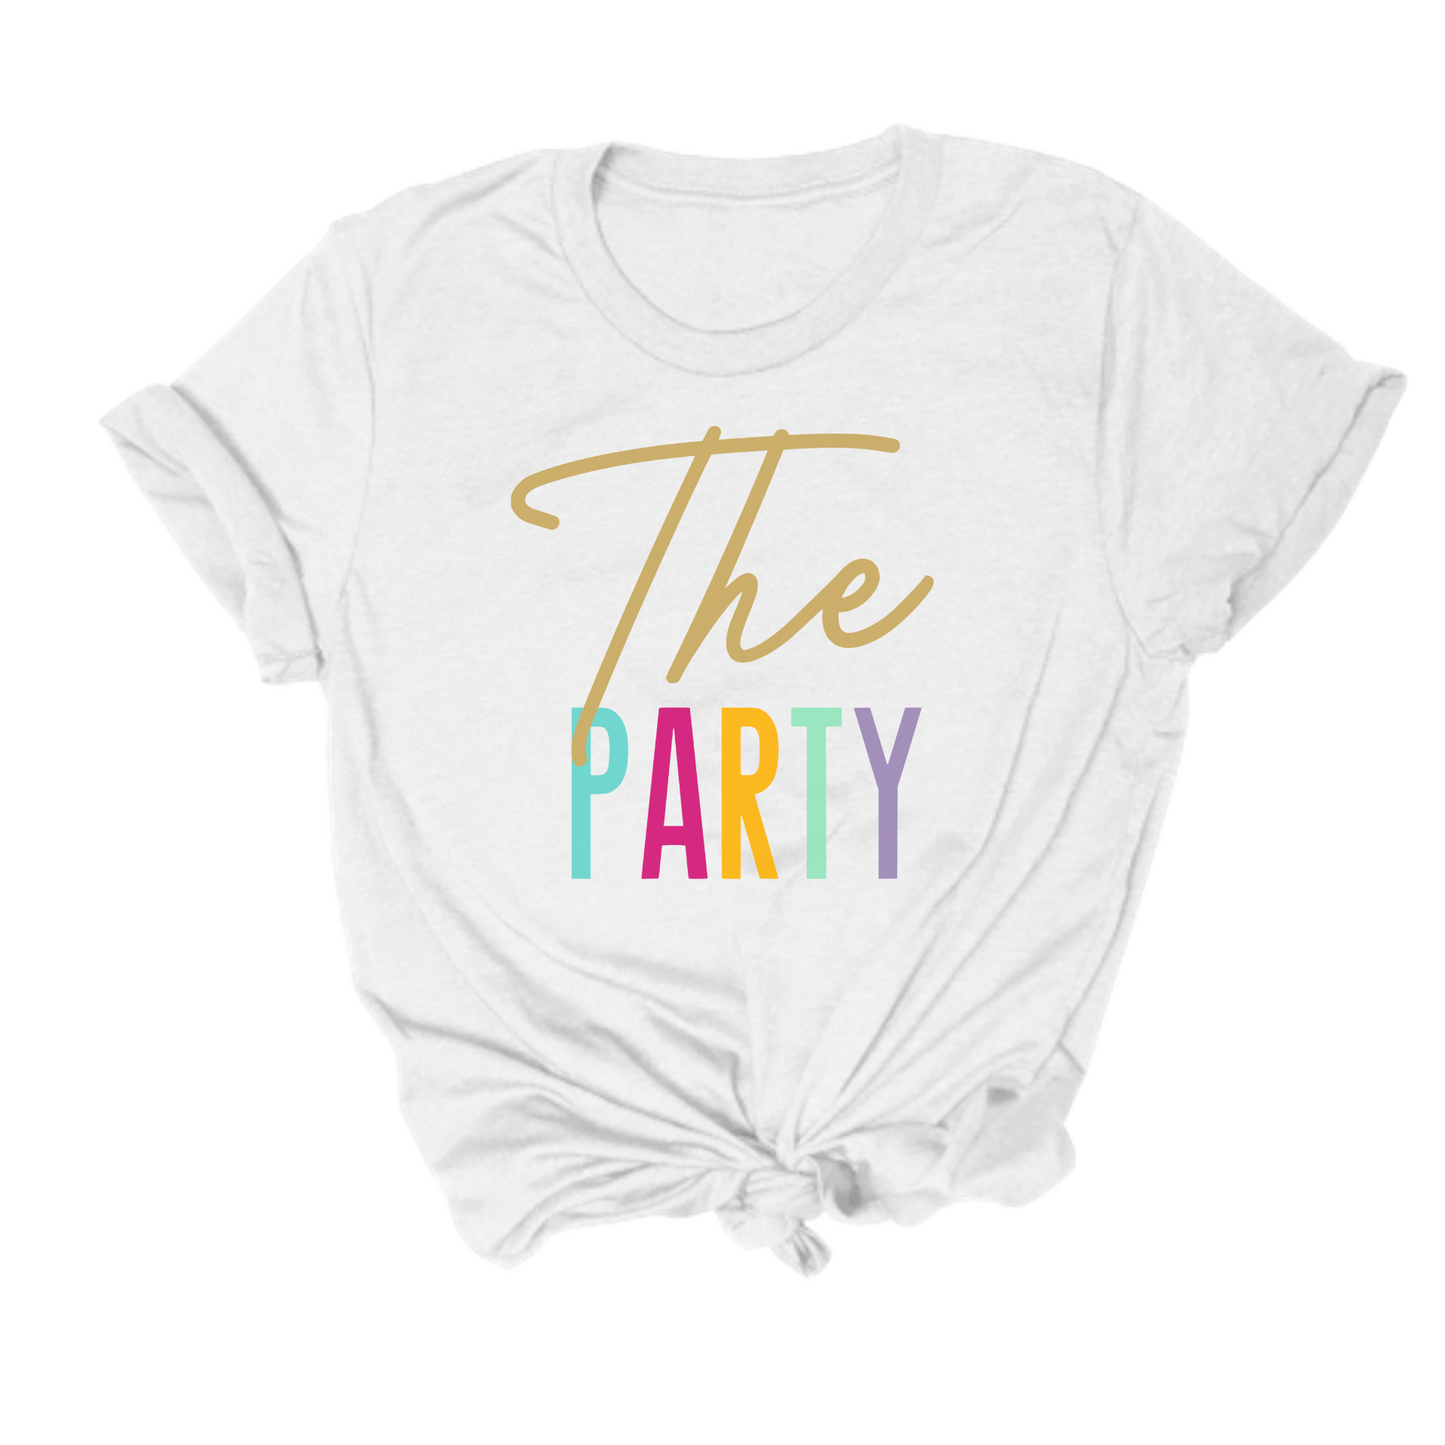 The Party Tee